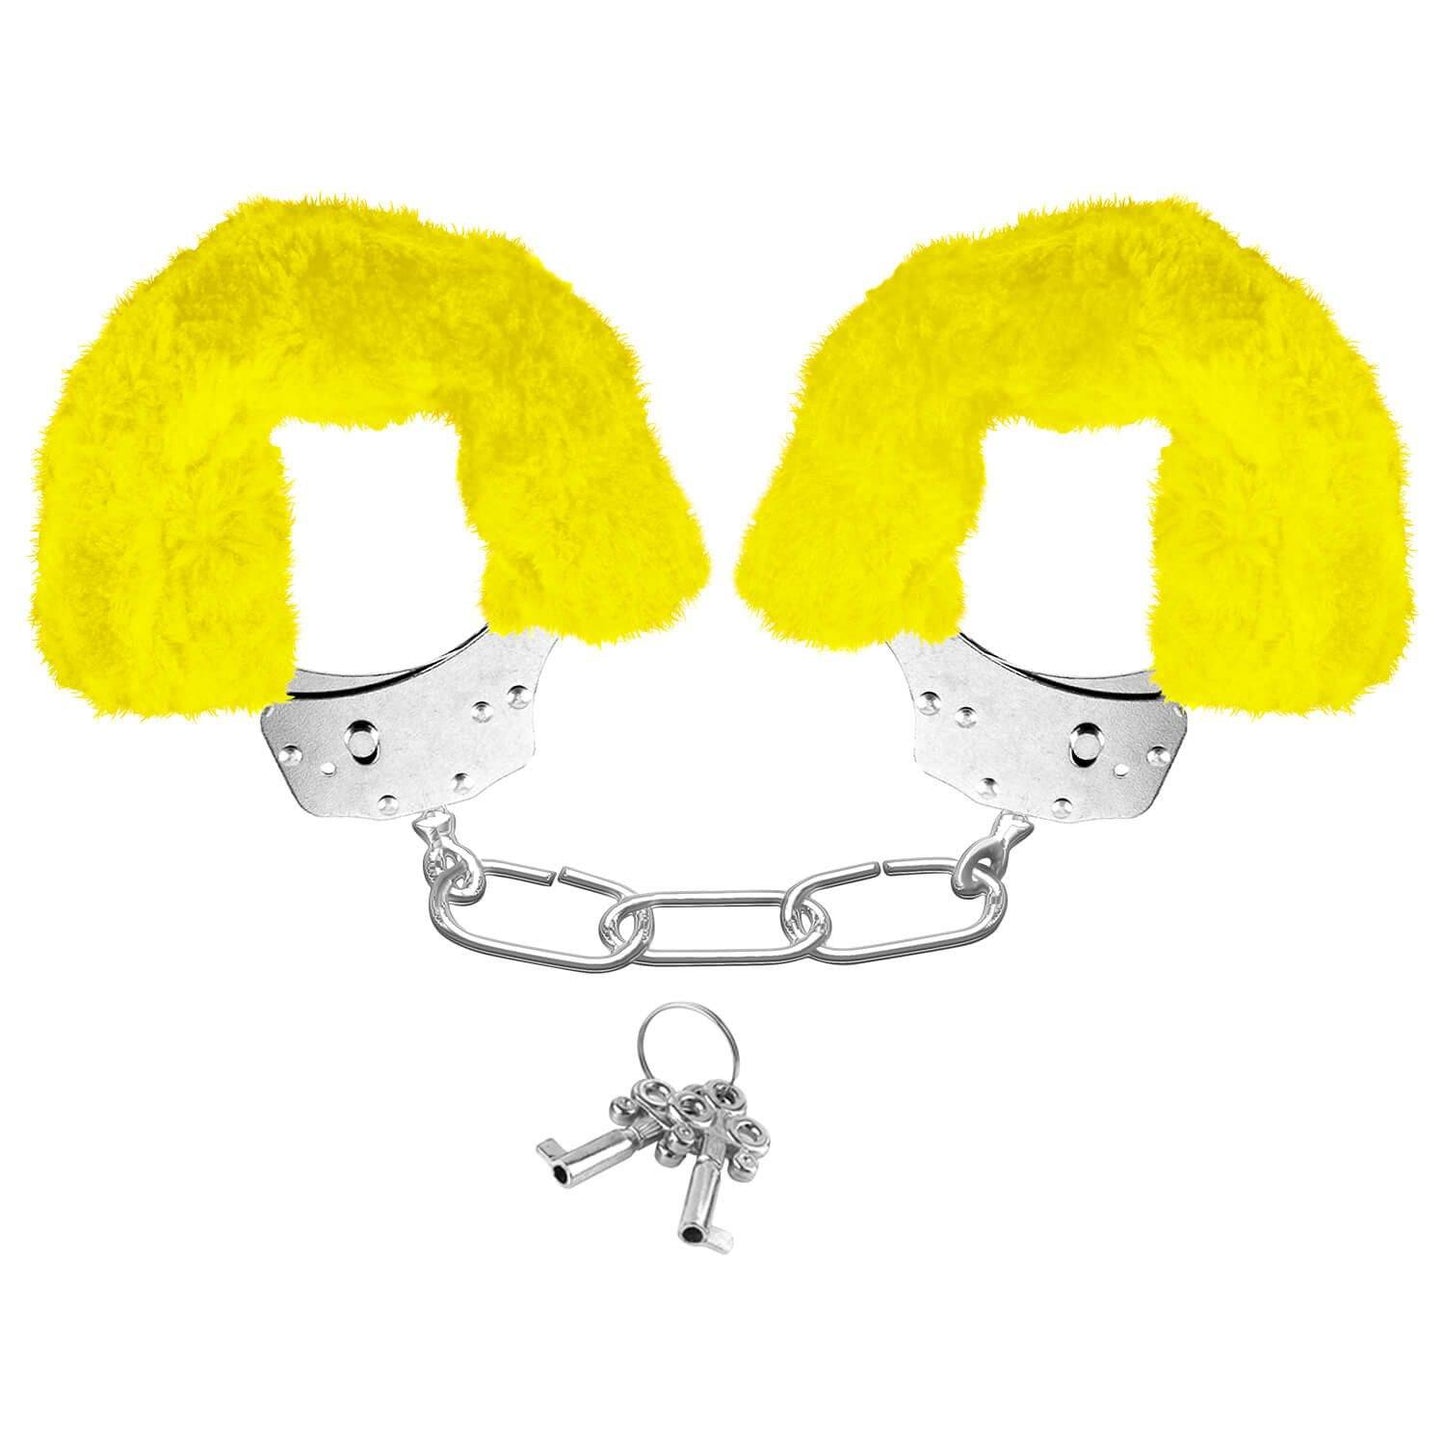 Neon Furry Cuffs - Lock Up Your Lover!